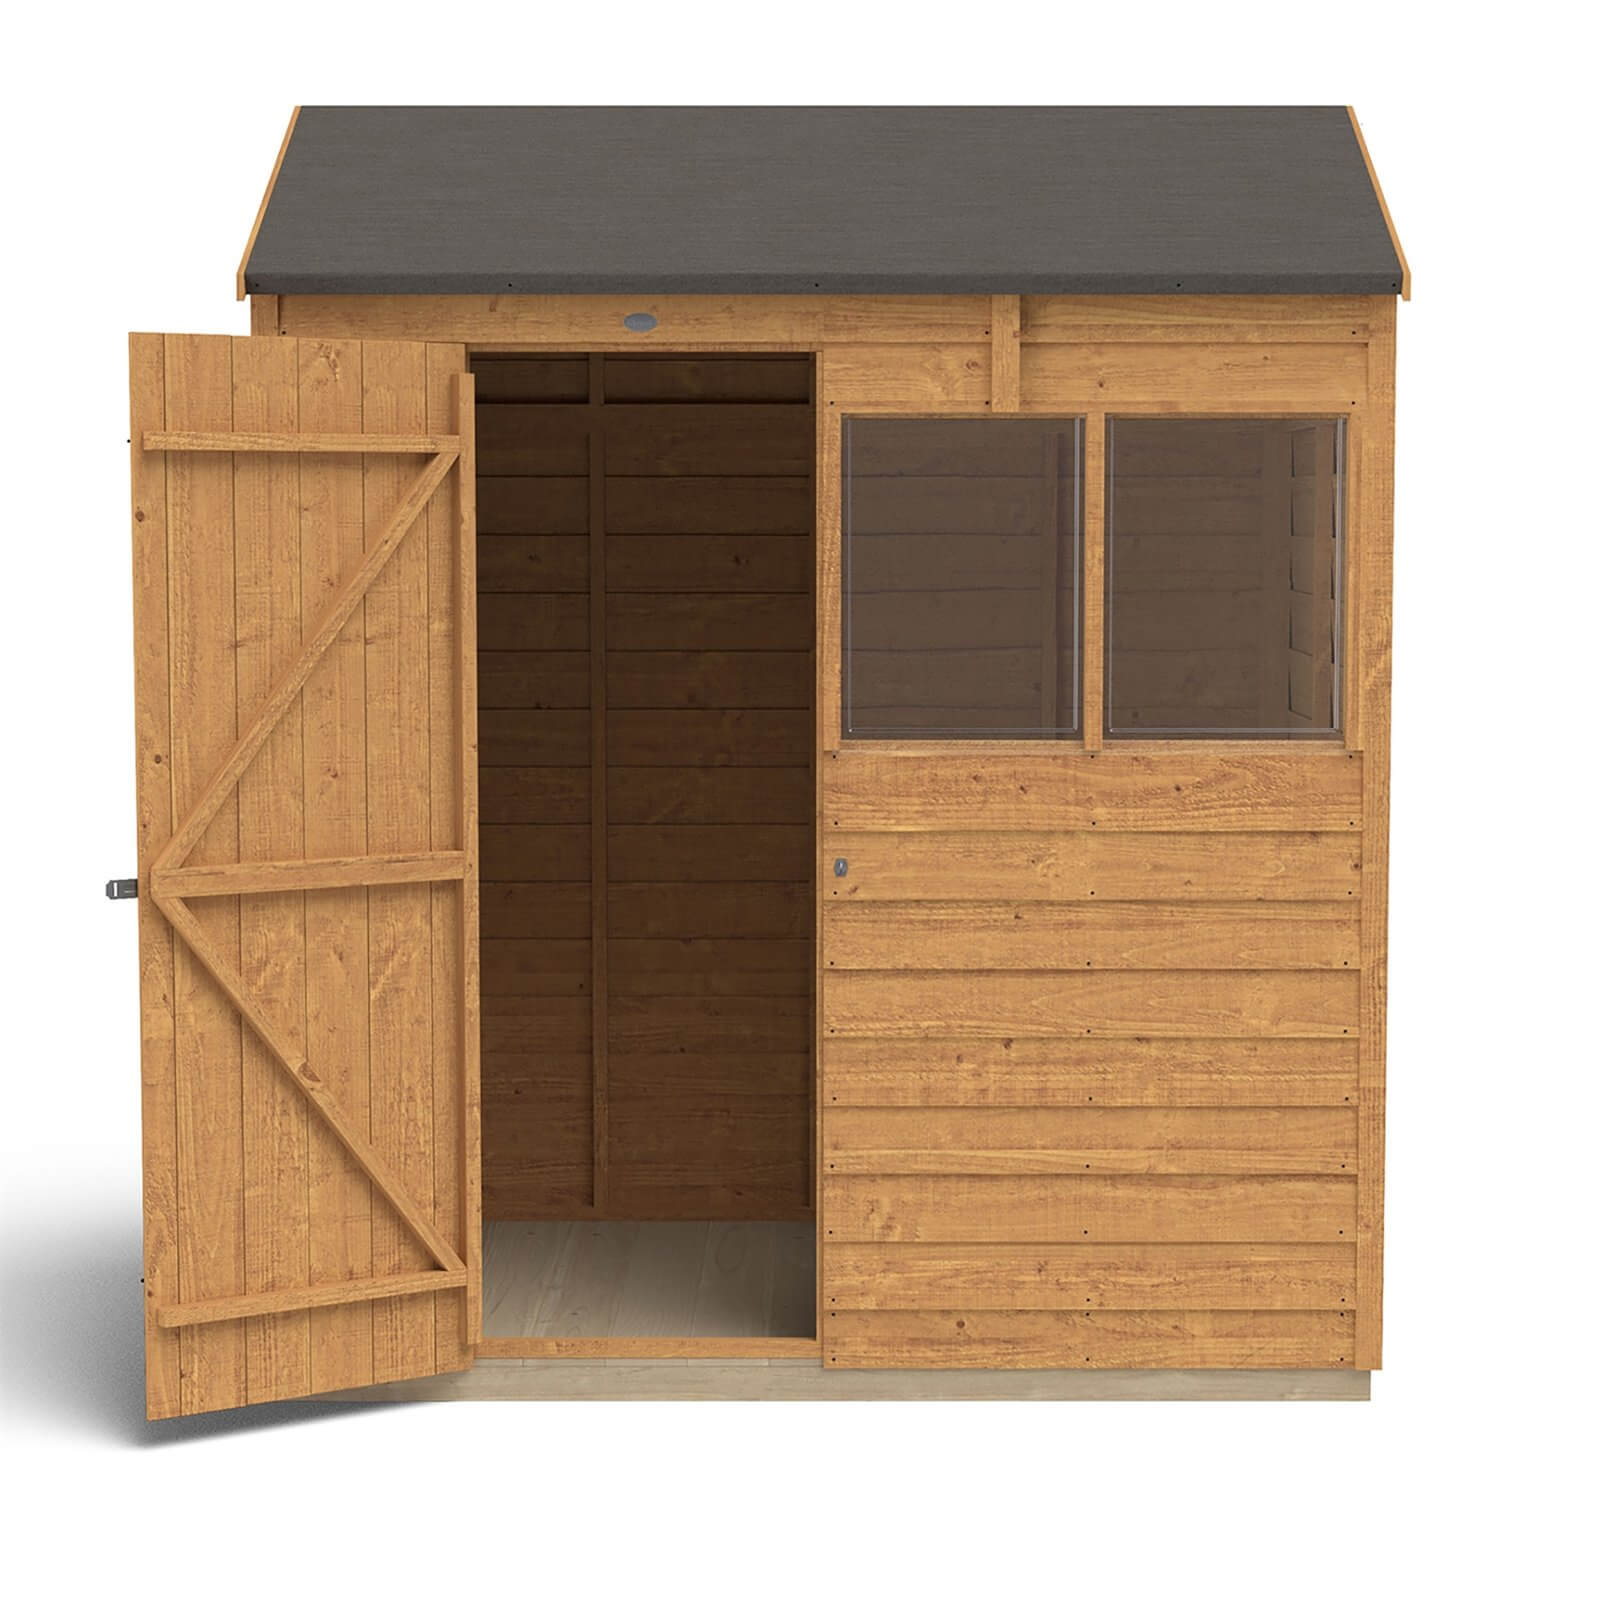 Forest Overlap 6 x 4ft Dip Treated Reverse Apex Shed